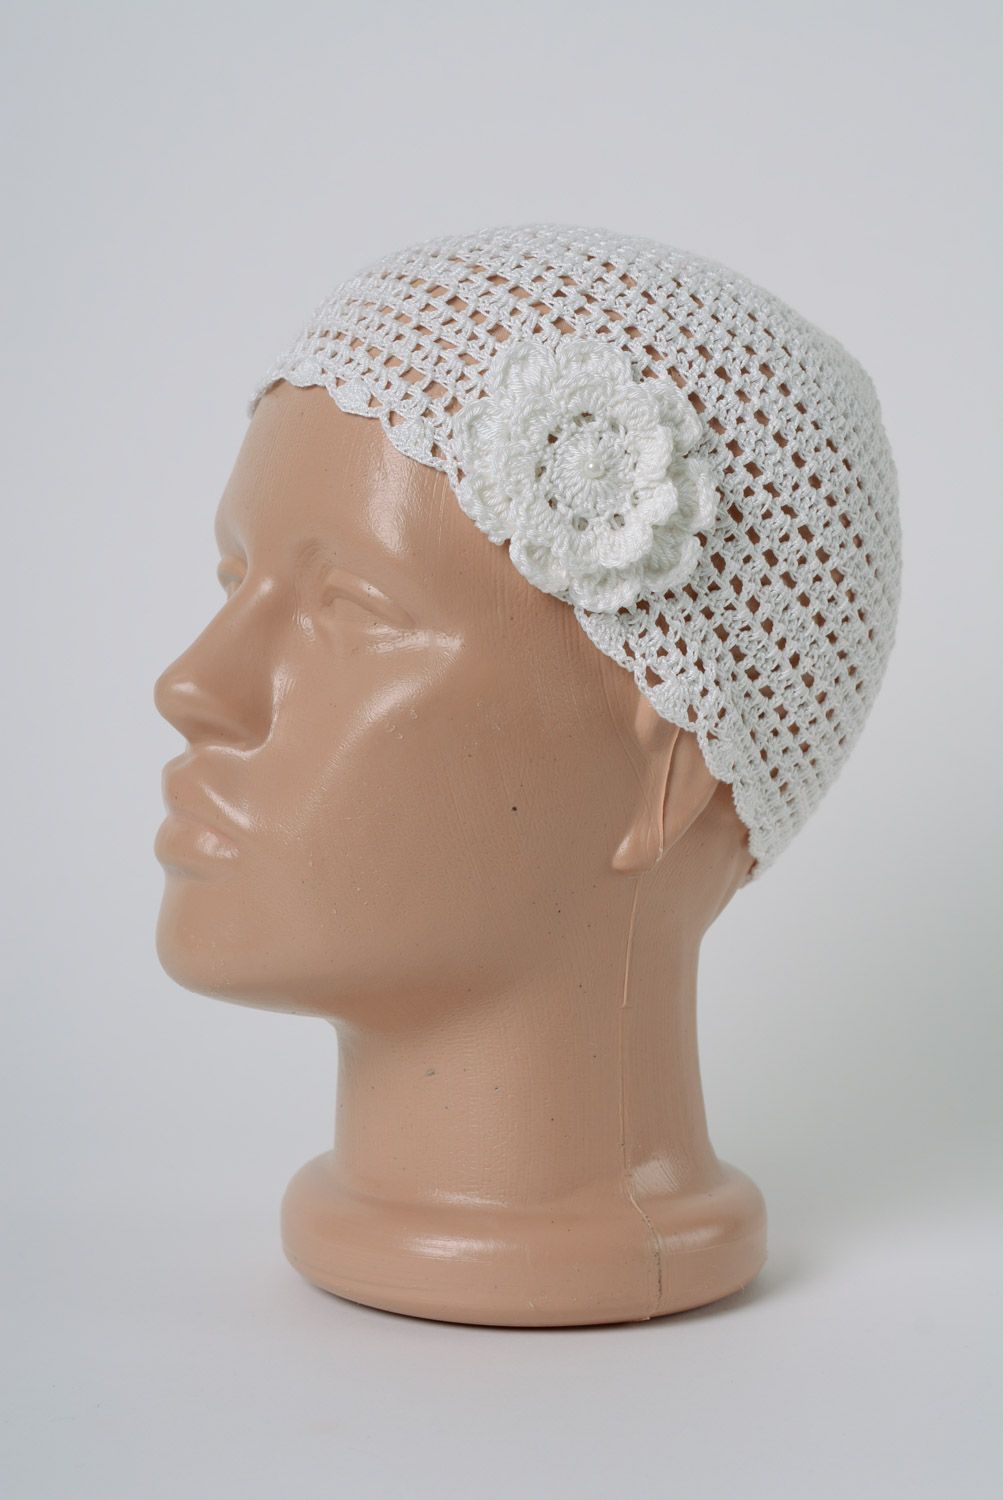 Handmade white lacy hat crocheted of cotton threads with flowers and beads photo 1